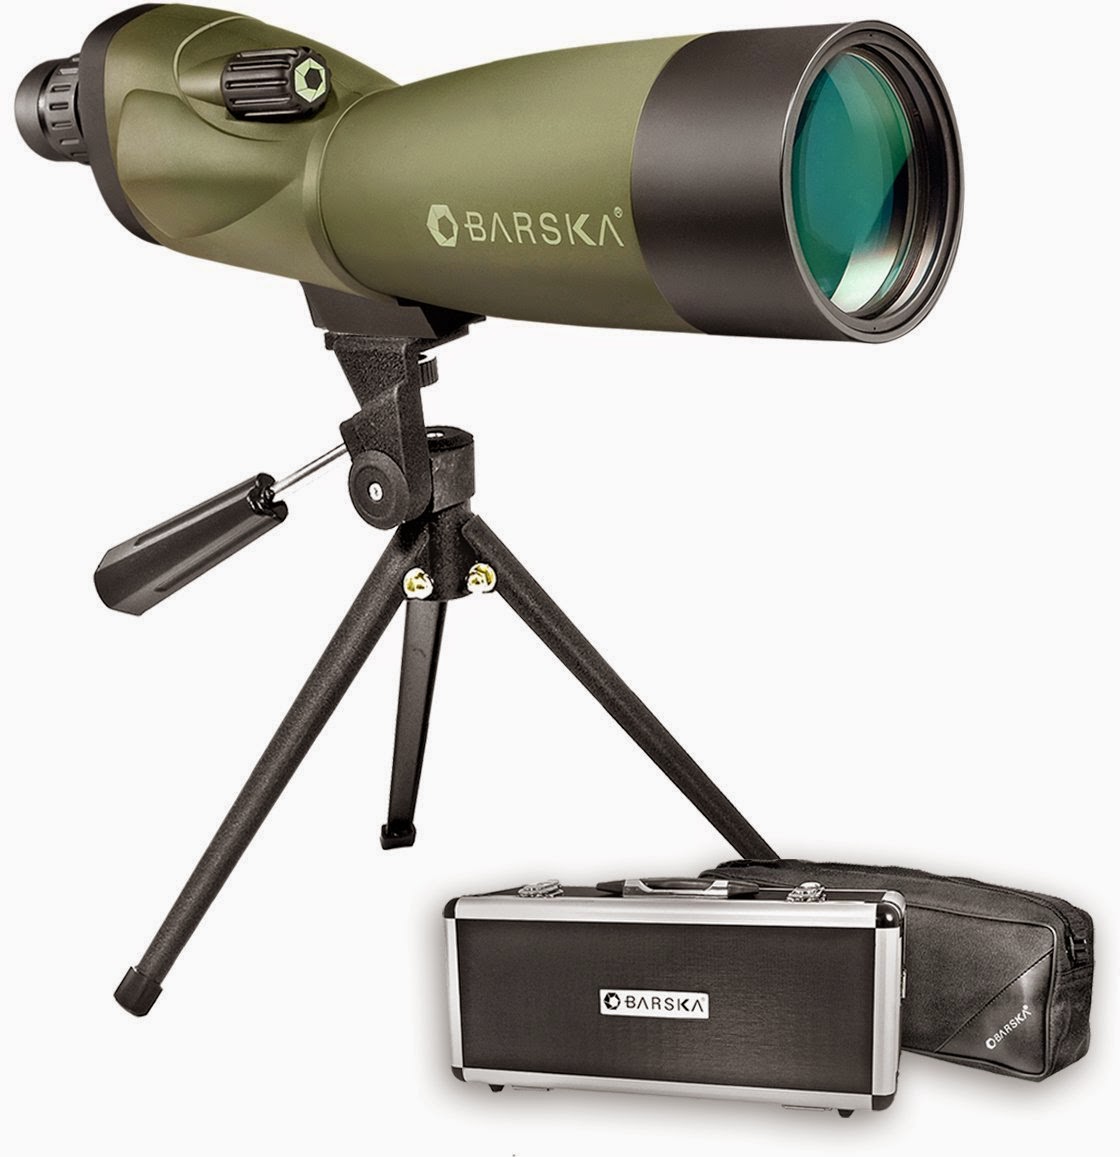 BARSKA Blackhawk 20-60x60 Waterproof Straight Spotting Scope, picture, image, review features and specifications